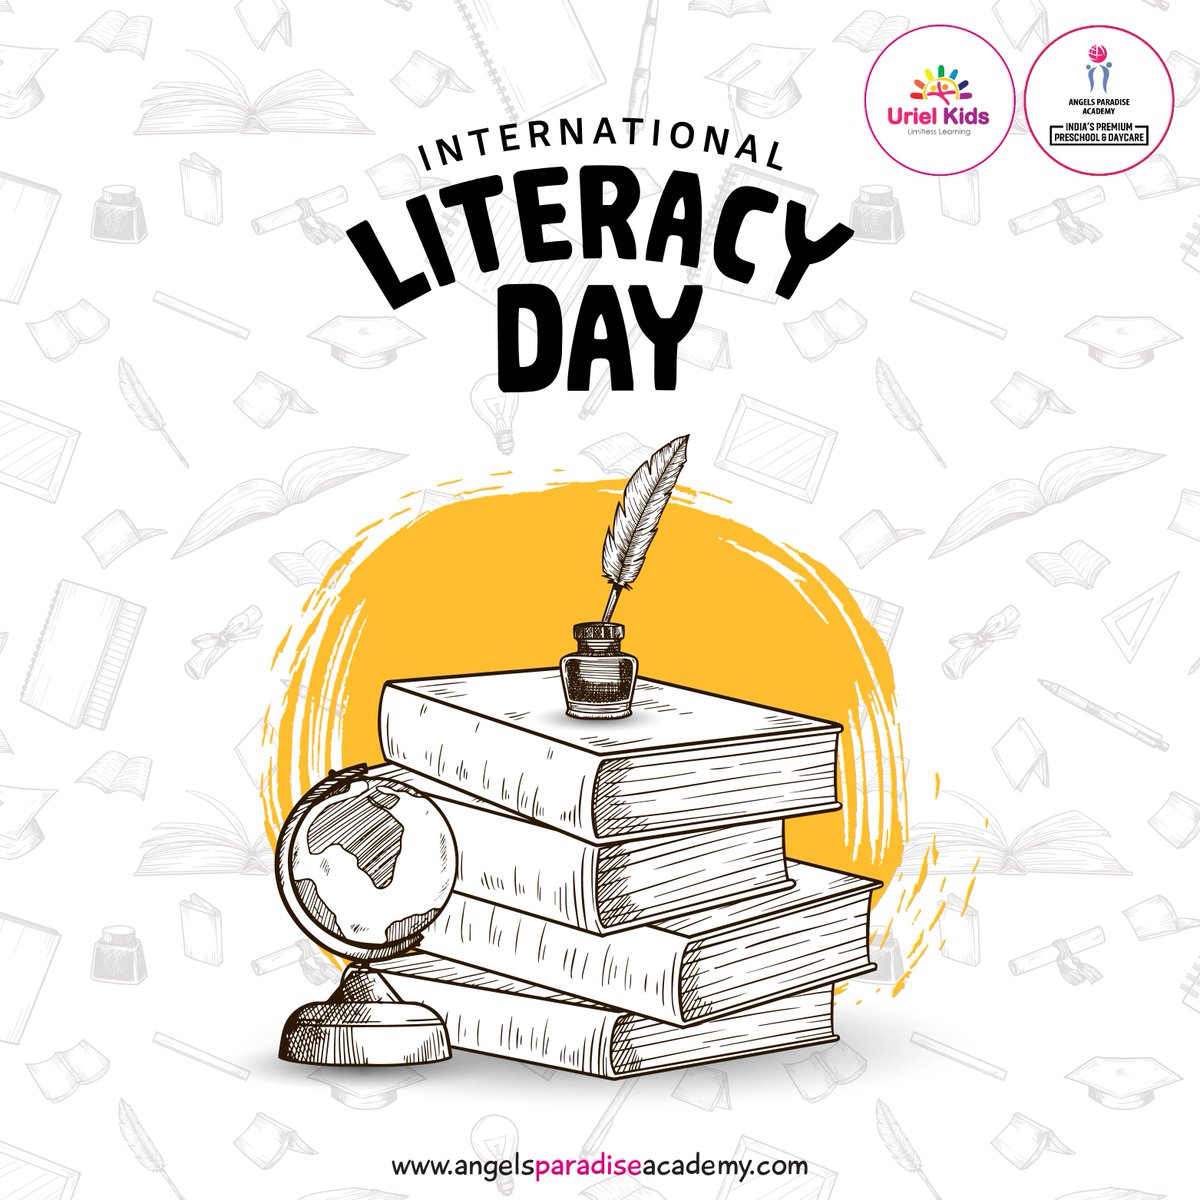 Love for reading never dies but it spreads all over!! 
#literacyday #literacy #internationalliteracyday #preschool #education #learning #books #reading #children #readinglove